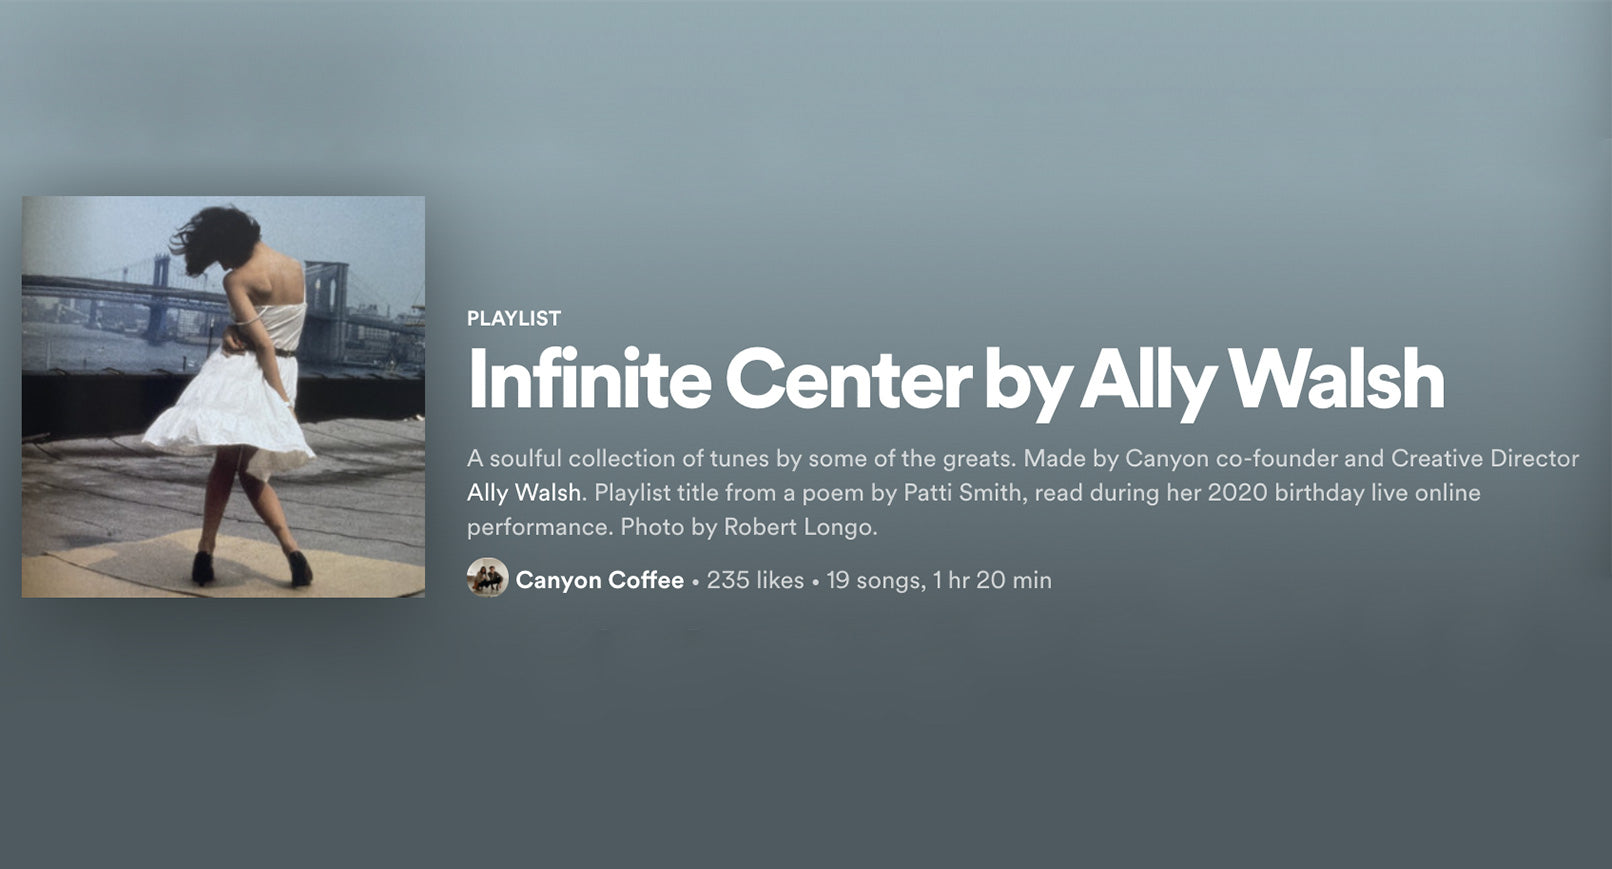 Infinite Center: A Playlist by Ally Walsh